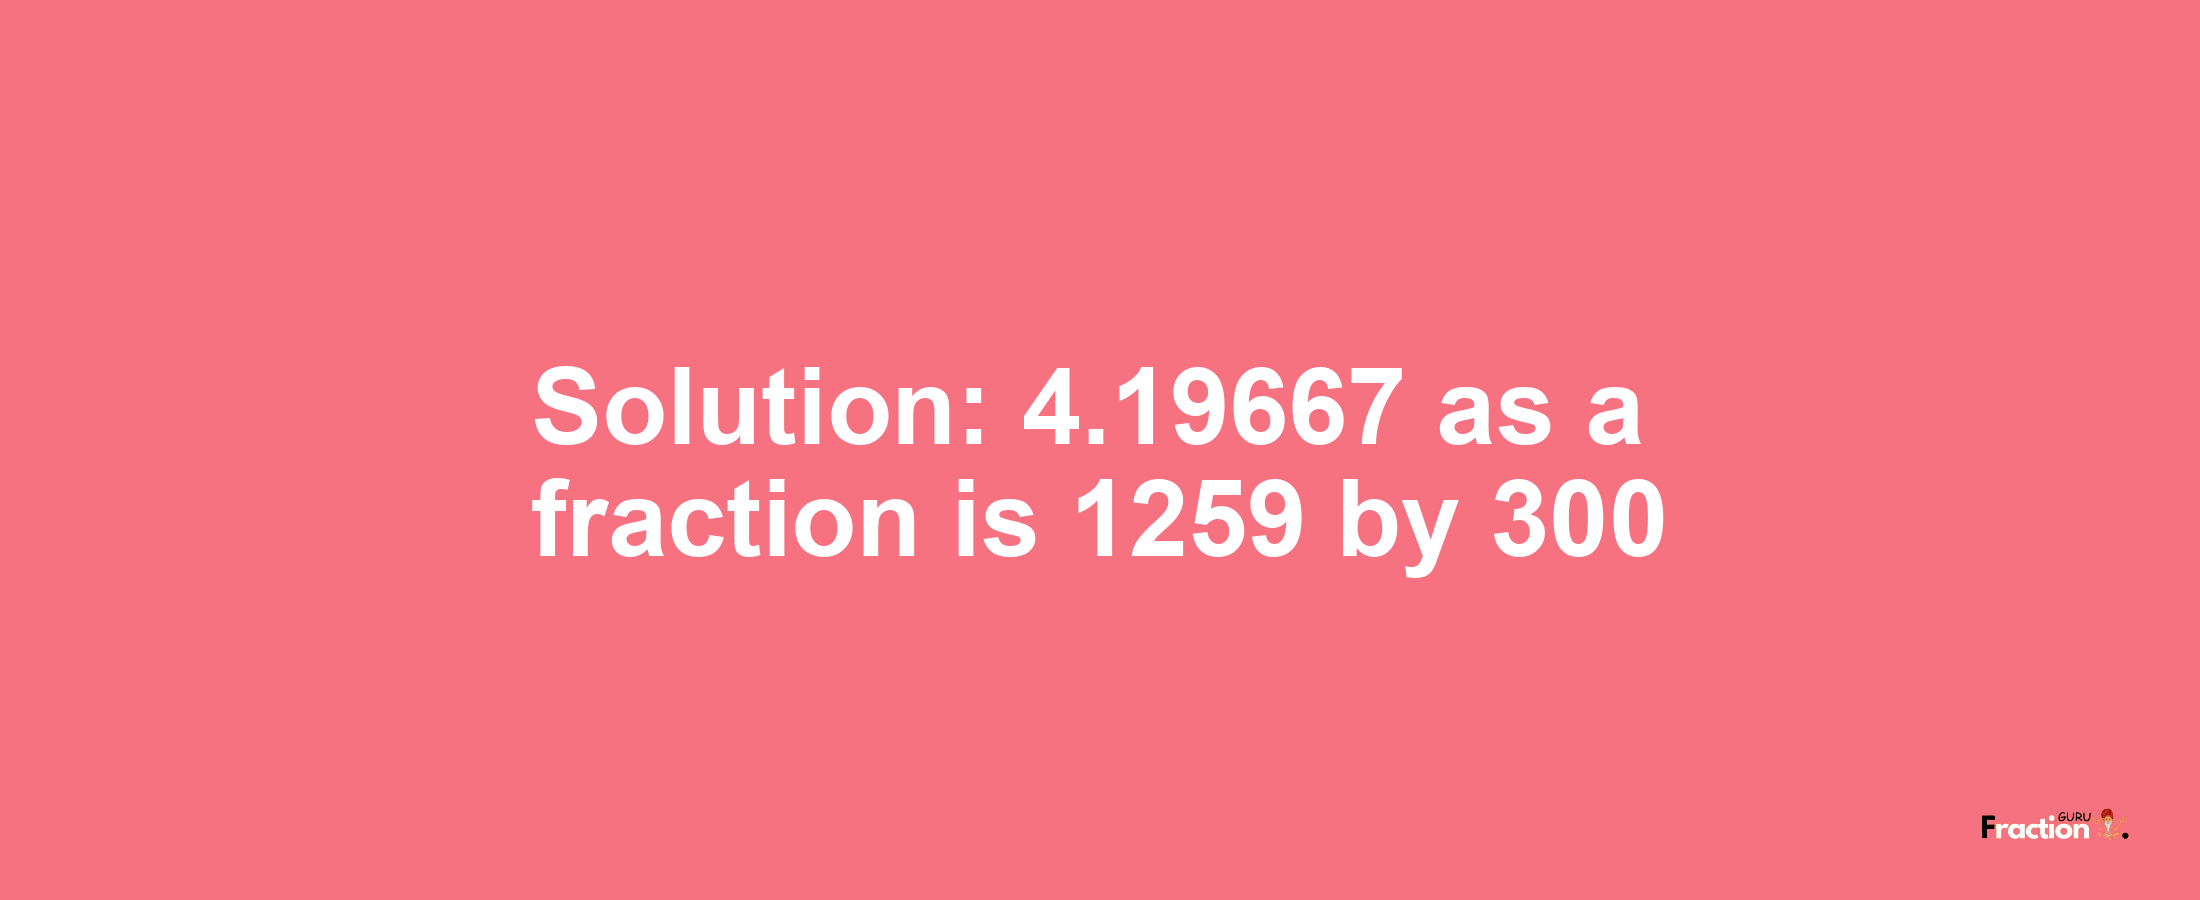 Solution:4.19667 as a fraction is 1259/300